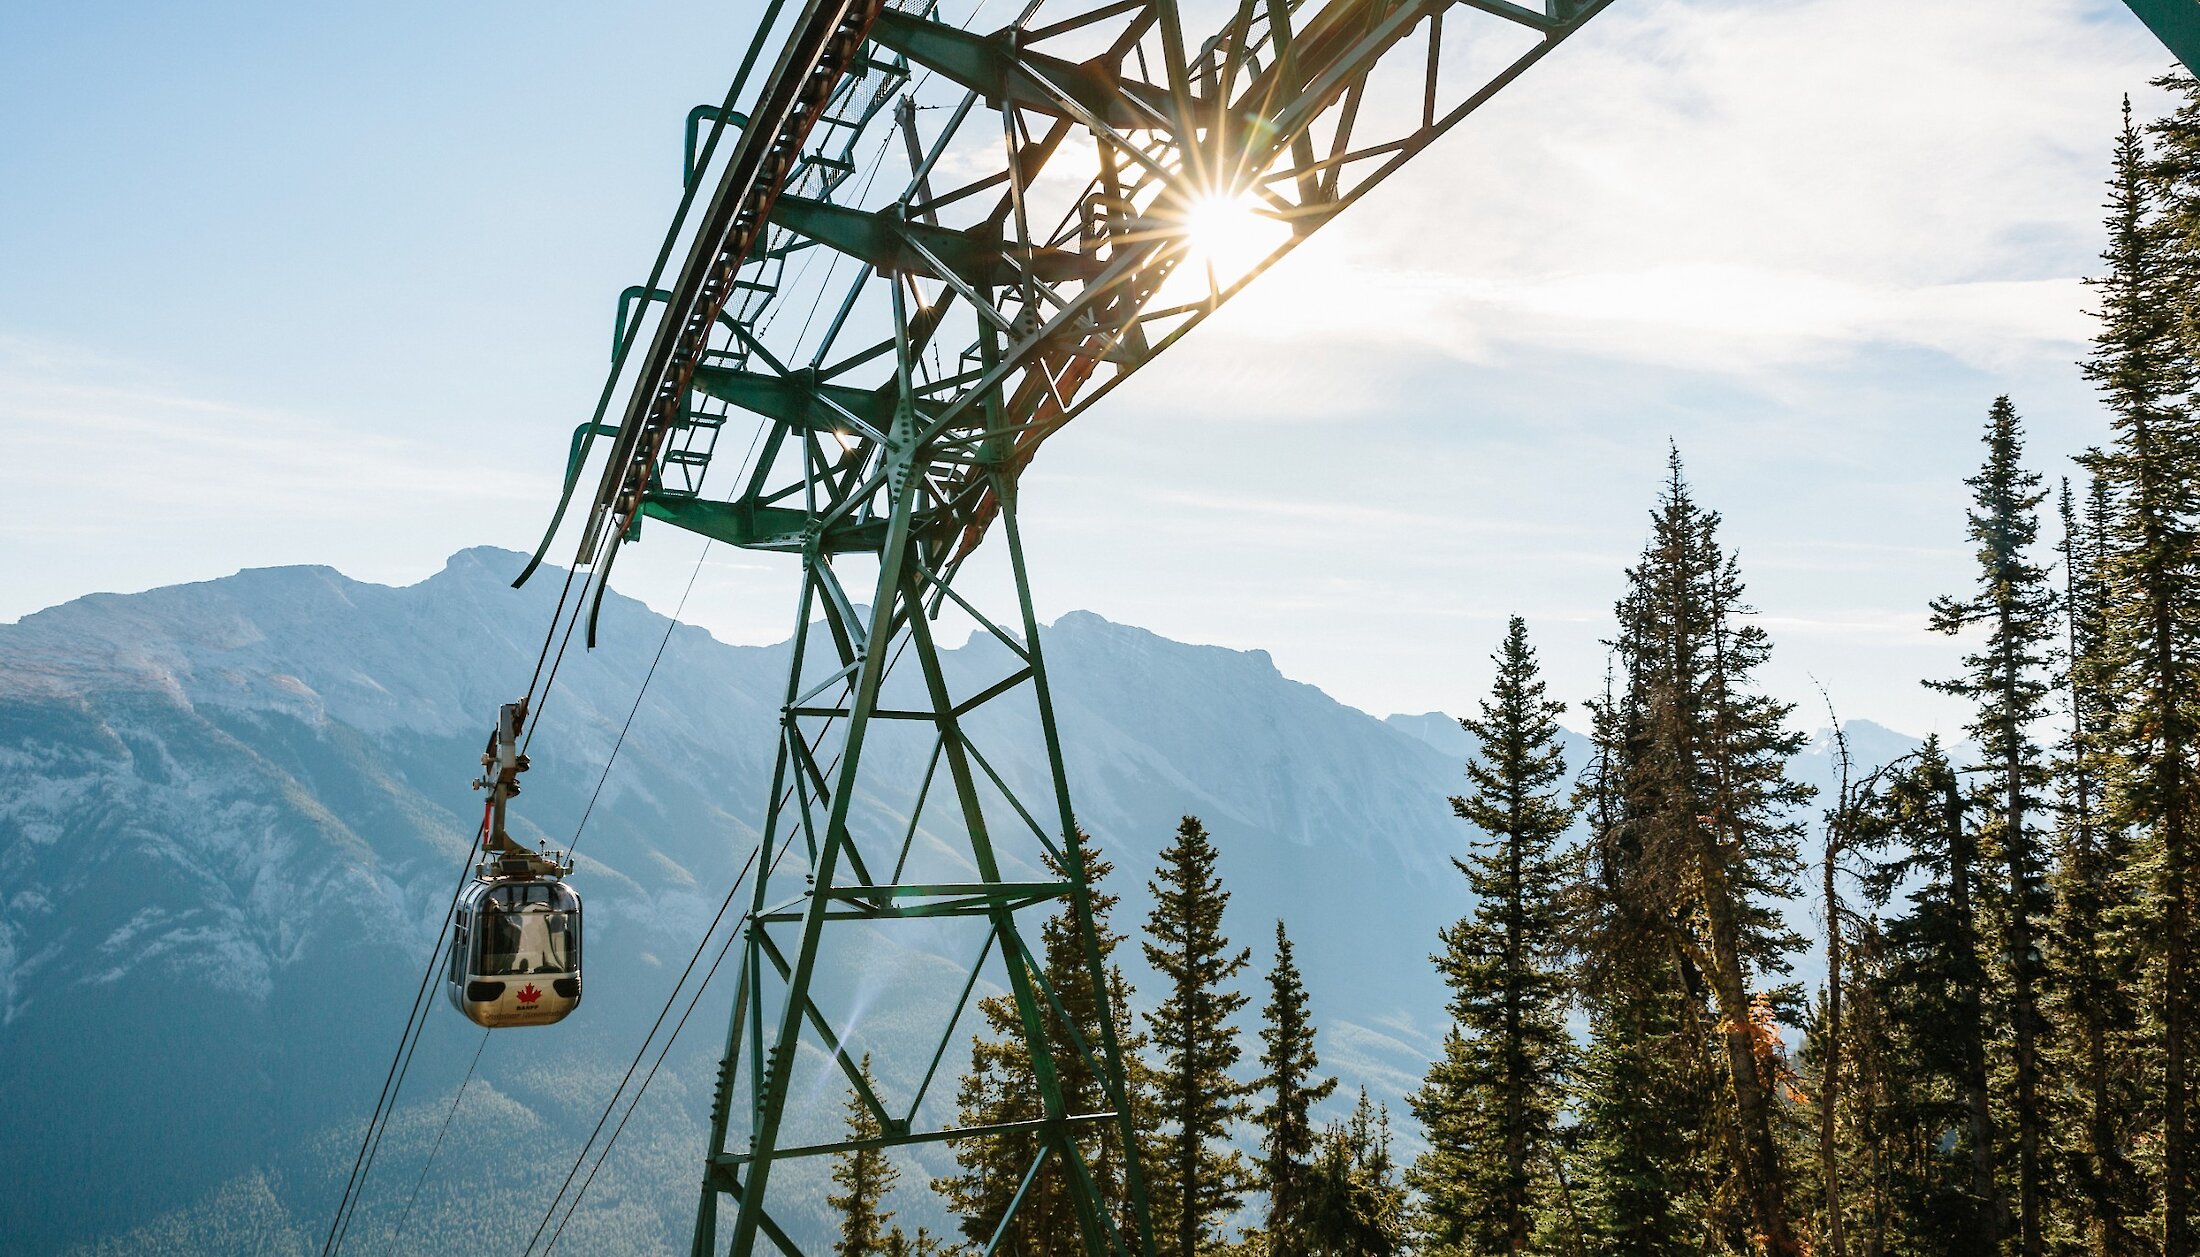 Ride to the top of Sulphur Mountain in the Banff Gondola